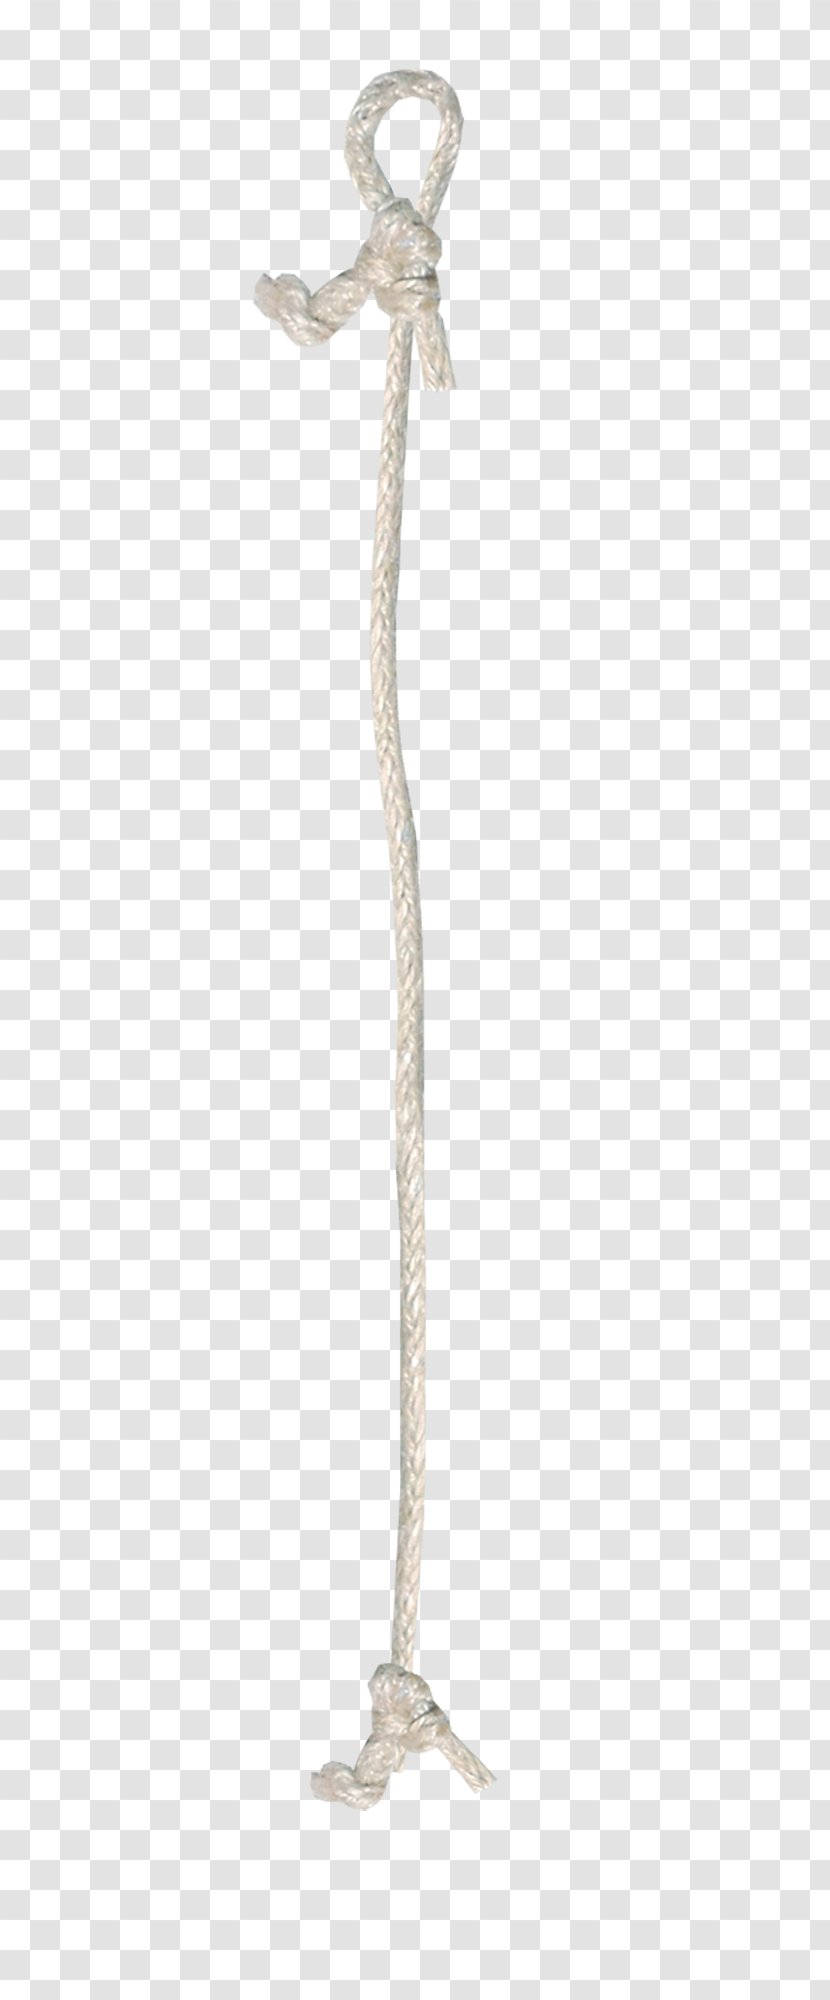 Rope Knot White Download - Wood - Material Transparent PNG